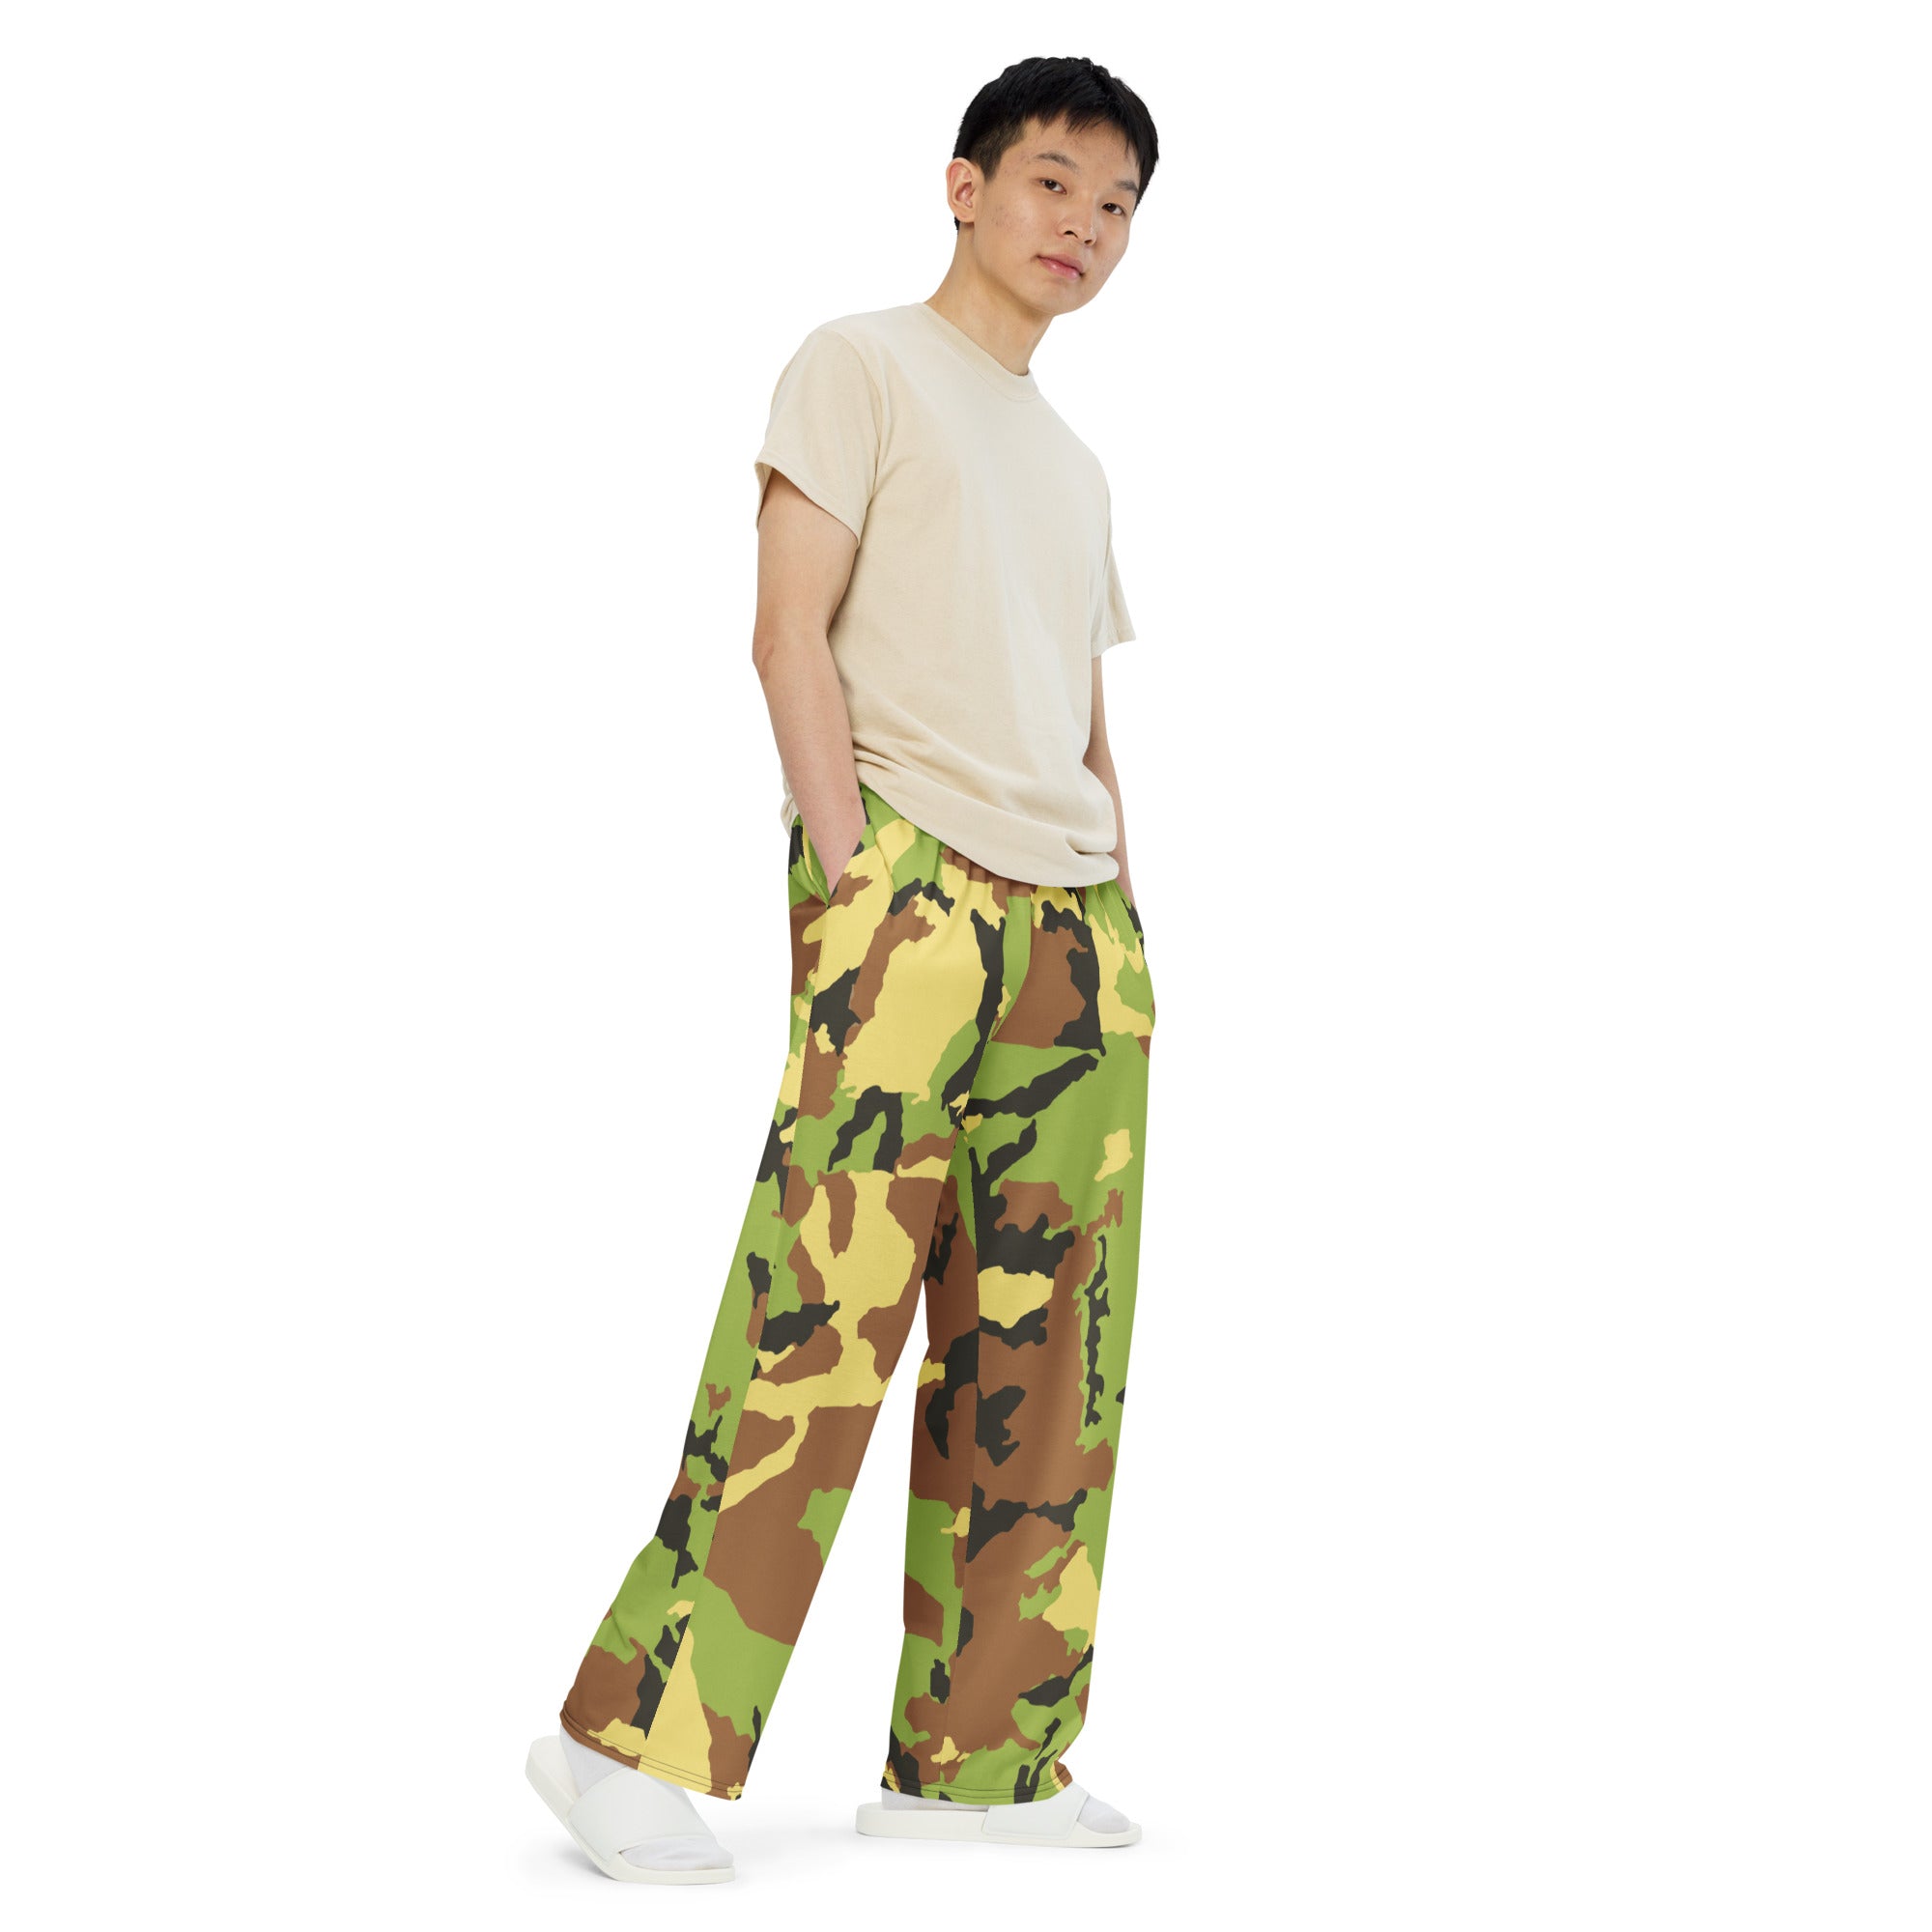 All-over print unisex wide-leg pants, Military Pants, Relaxing Pants,